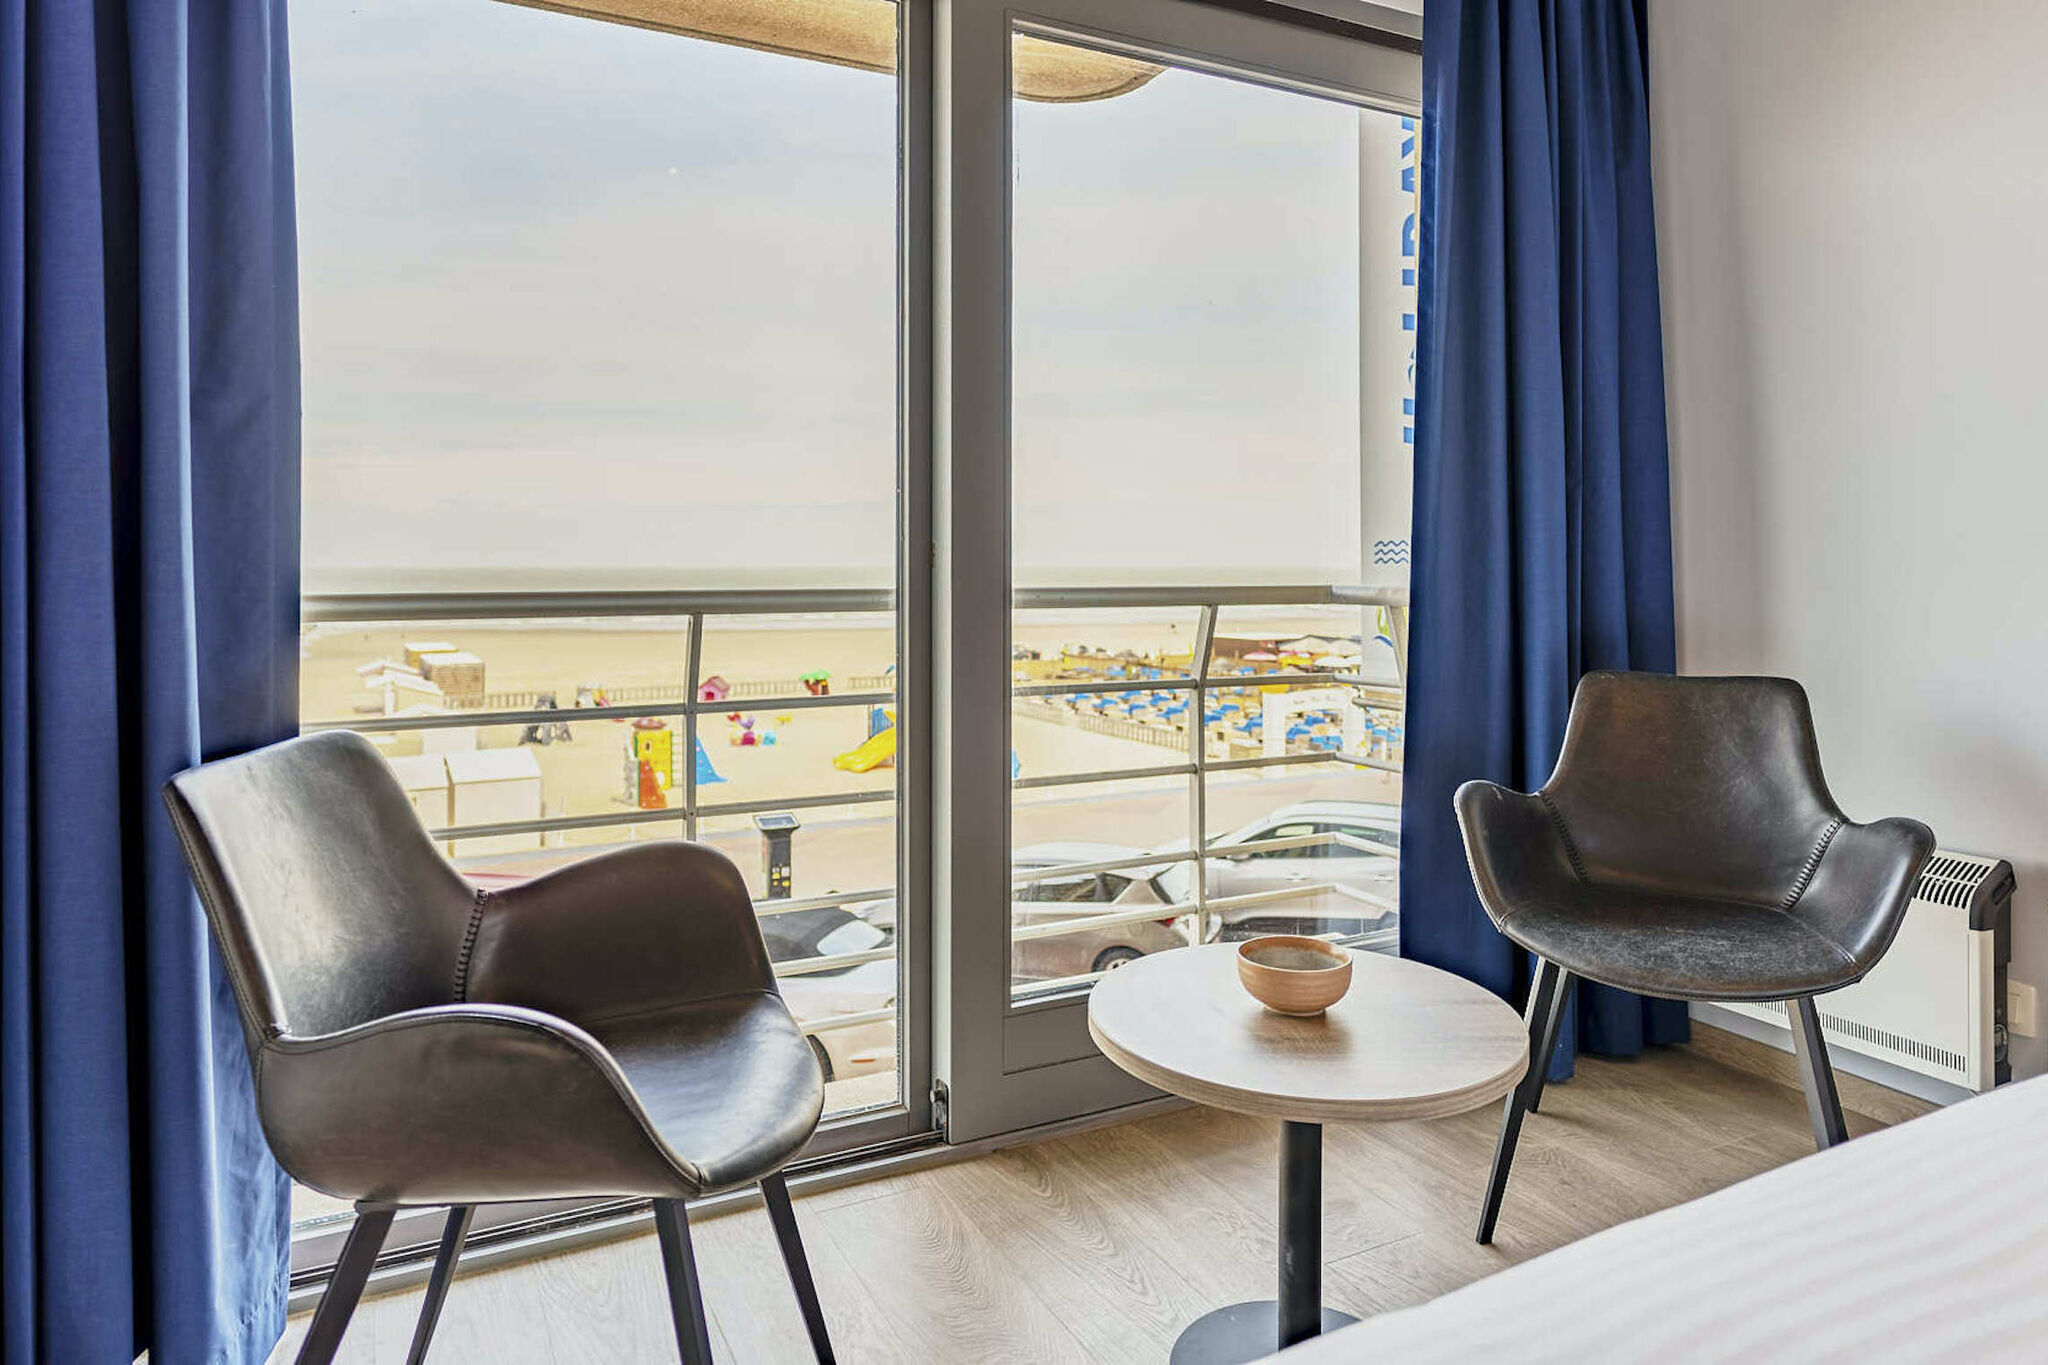 Comfortable studio in Blankenberge with a view over the city